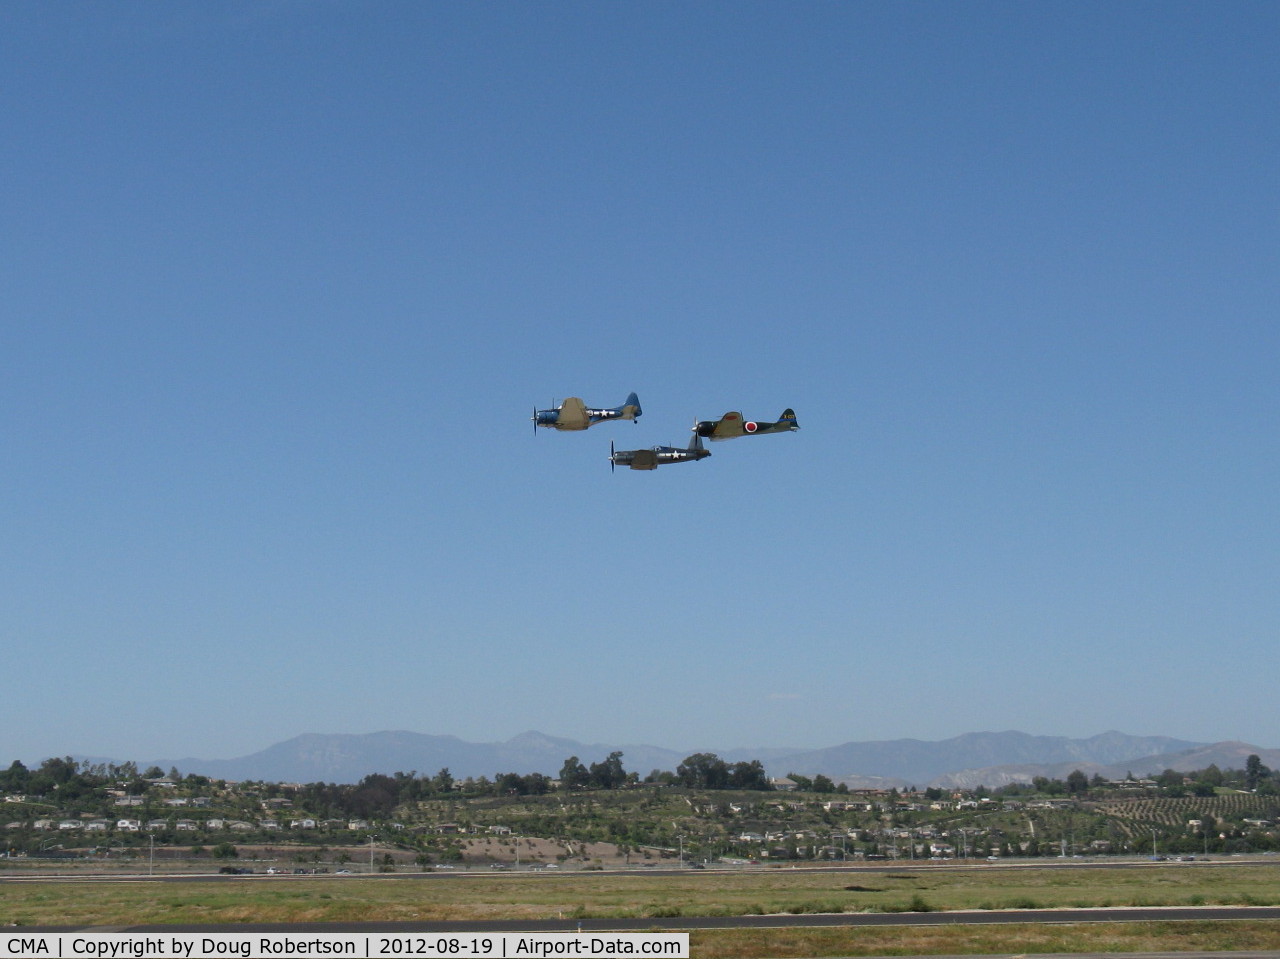 Camarillo Airport (CMA) - Douglas SBD Dauntless N670AM, Chance-Vought F4U-1 Corsair N83782 and Mitsubishi A6M Zero-Sen N712Z in formation over 26, Wings Over Camarillo Airshow 2012